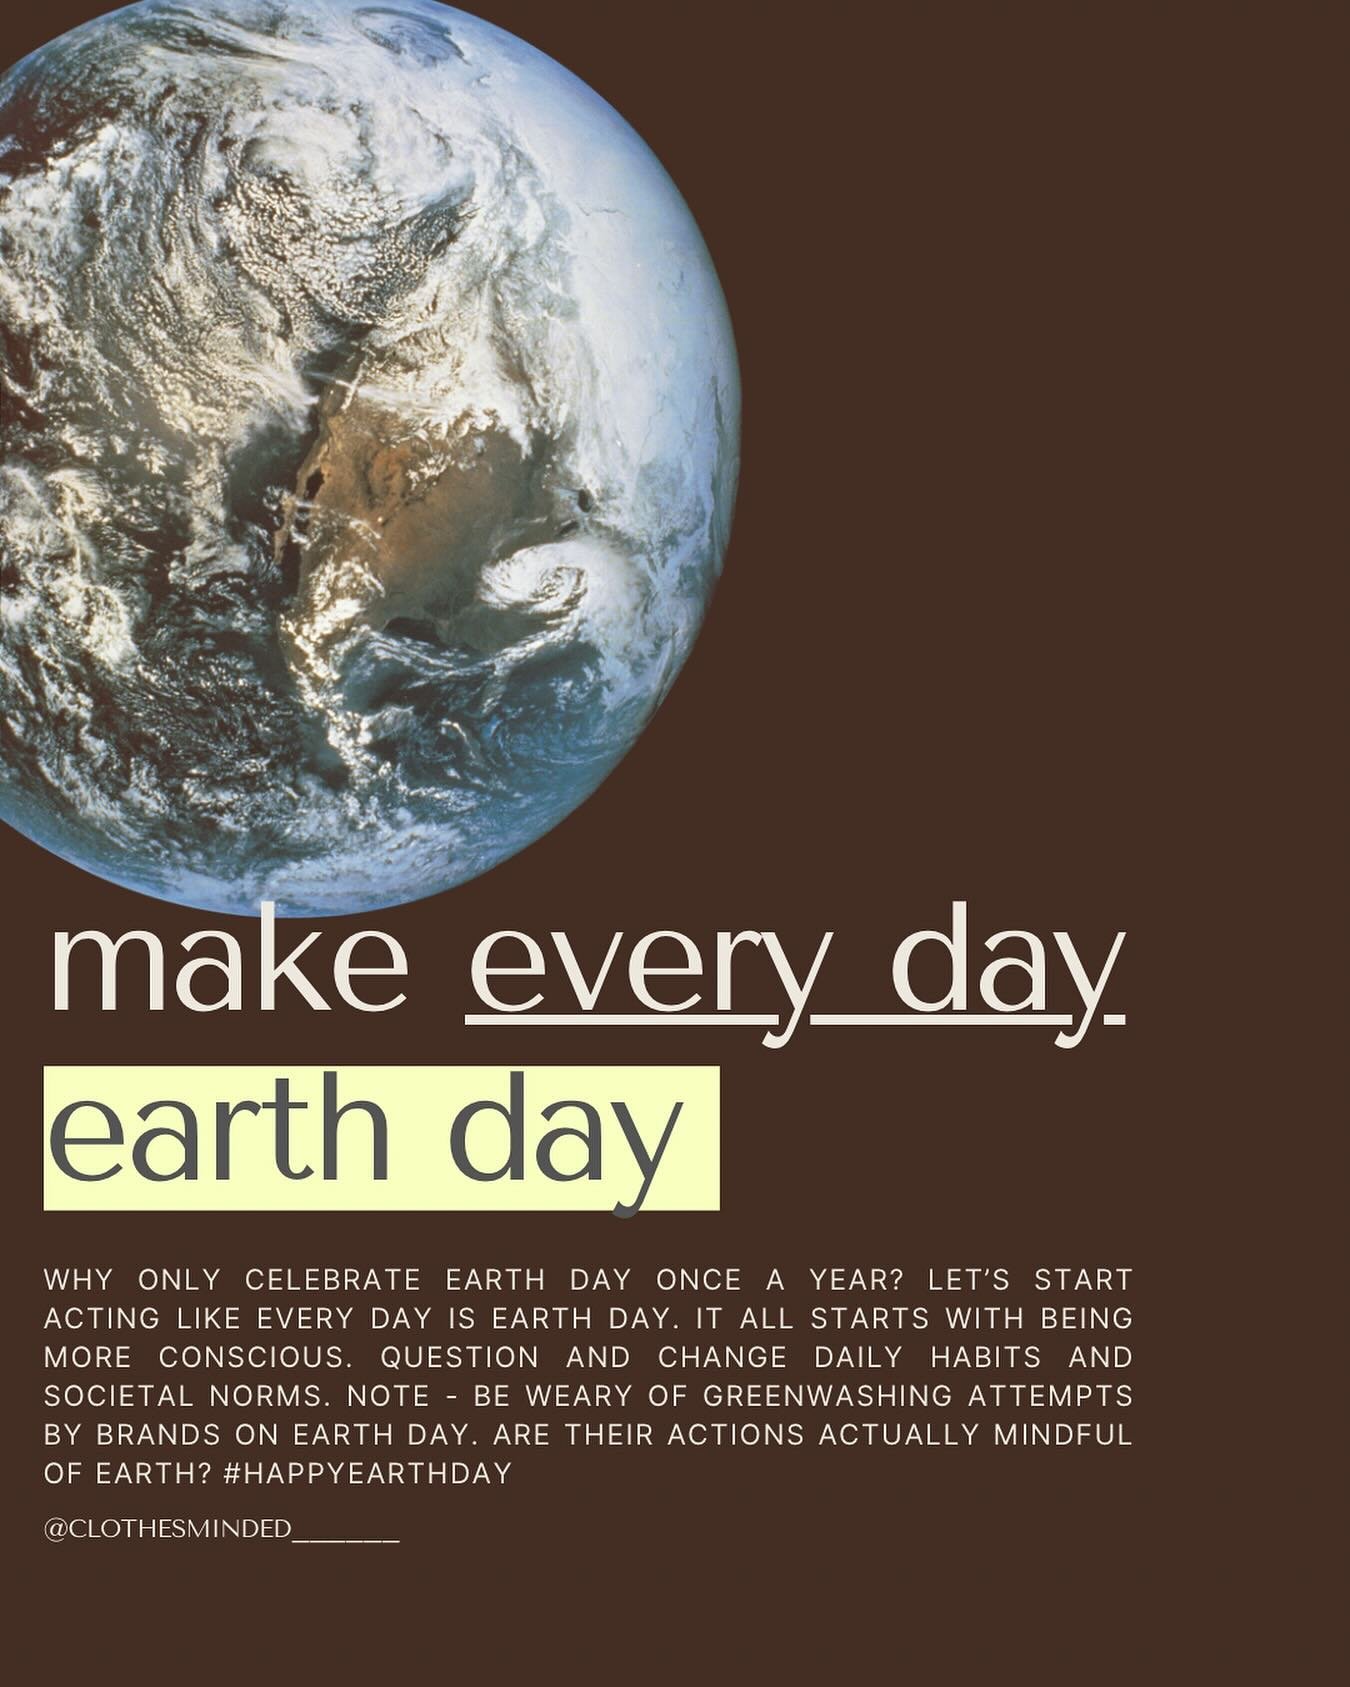 Let&rsquo;s make every day #earthday! 

Why only celebrate Earth Day once a year ? Let&rsquo;s start acting like every day is Earth Day. It all starts with being more conscious. Question and change daily habits and societal norms. 
Note - be weary of